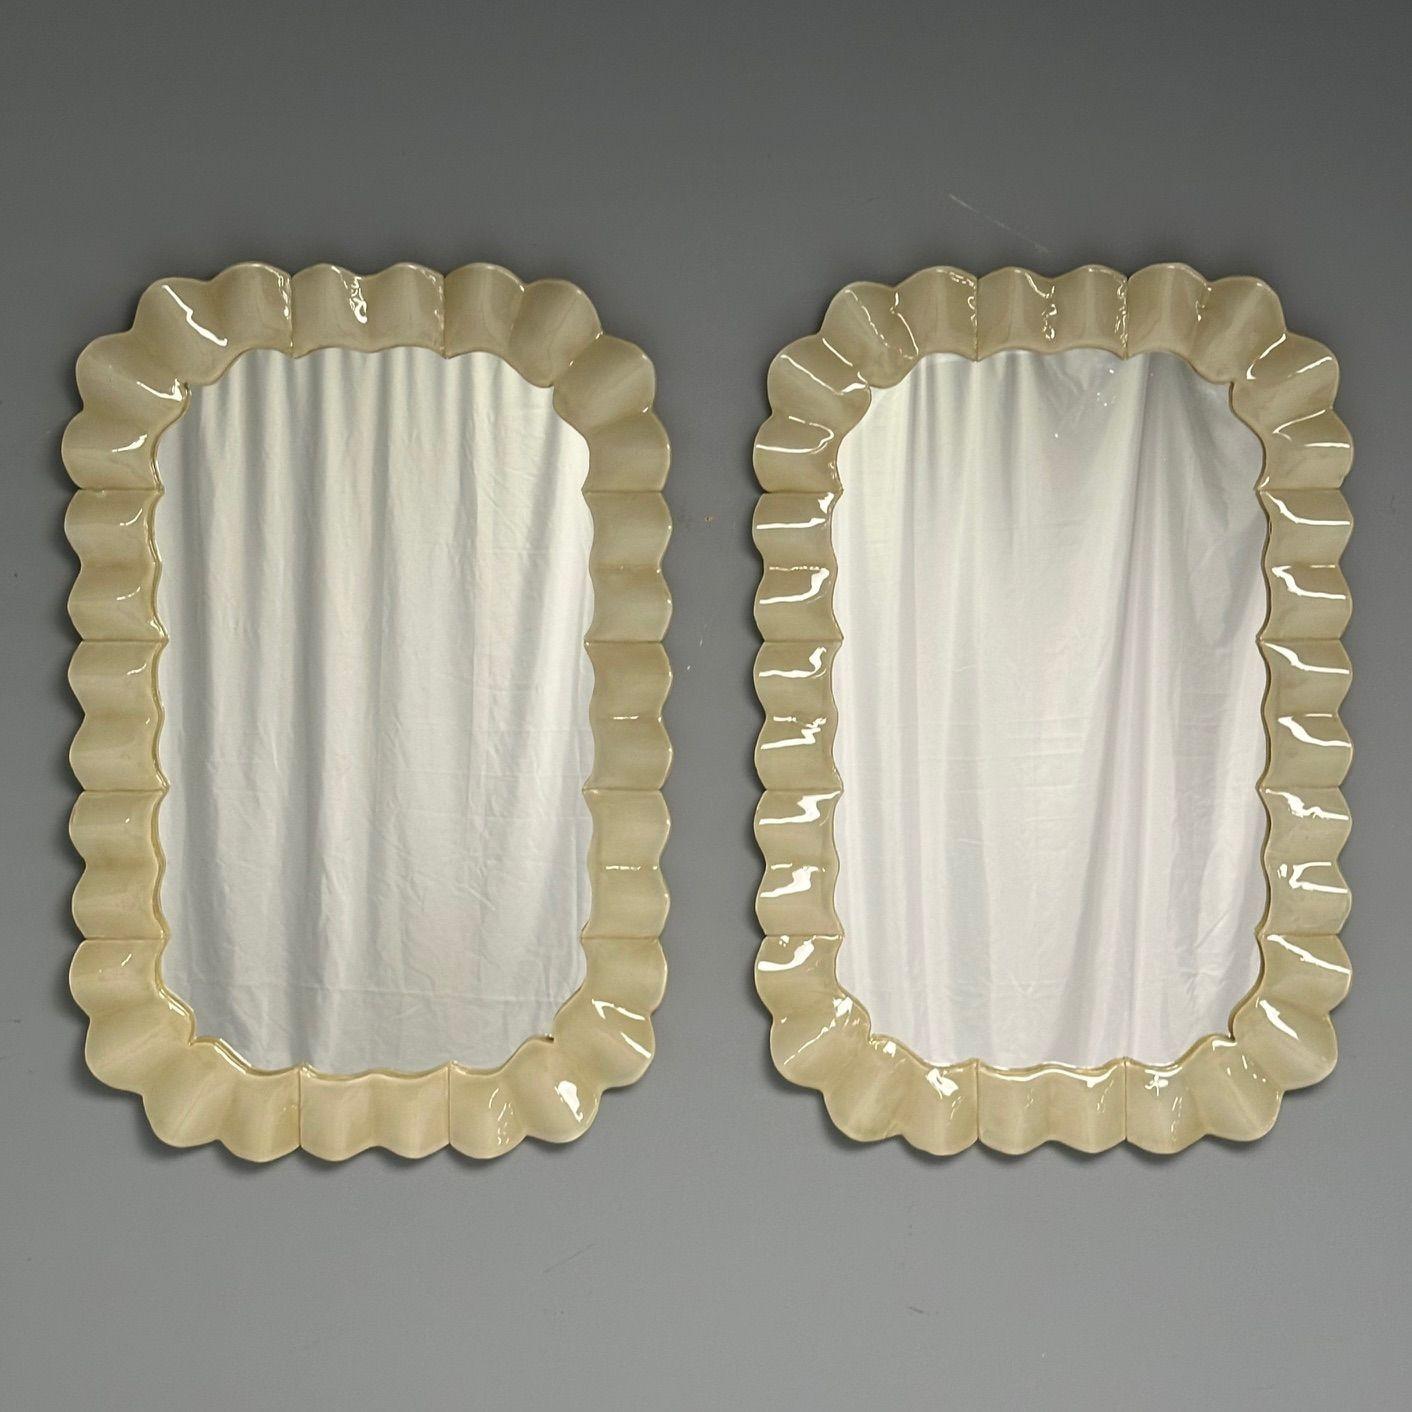 Contemporary, Wall Mirrors with Ruffle Motif, White Murano Glass, Brass, Italy, 2023

Pair of rectangular wall mirrors with ruffle motif designed and produced in Italy. Each mirror has a wavy white Murano glass frame and holes on the back to be hung